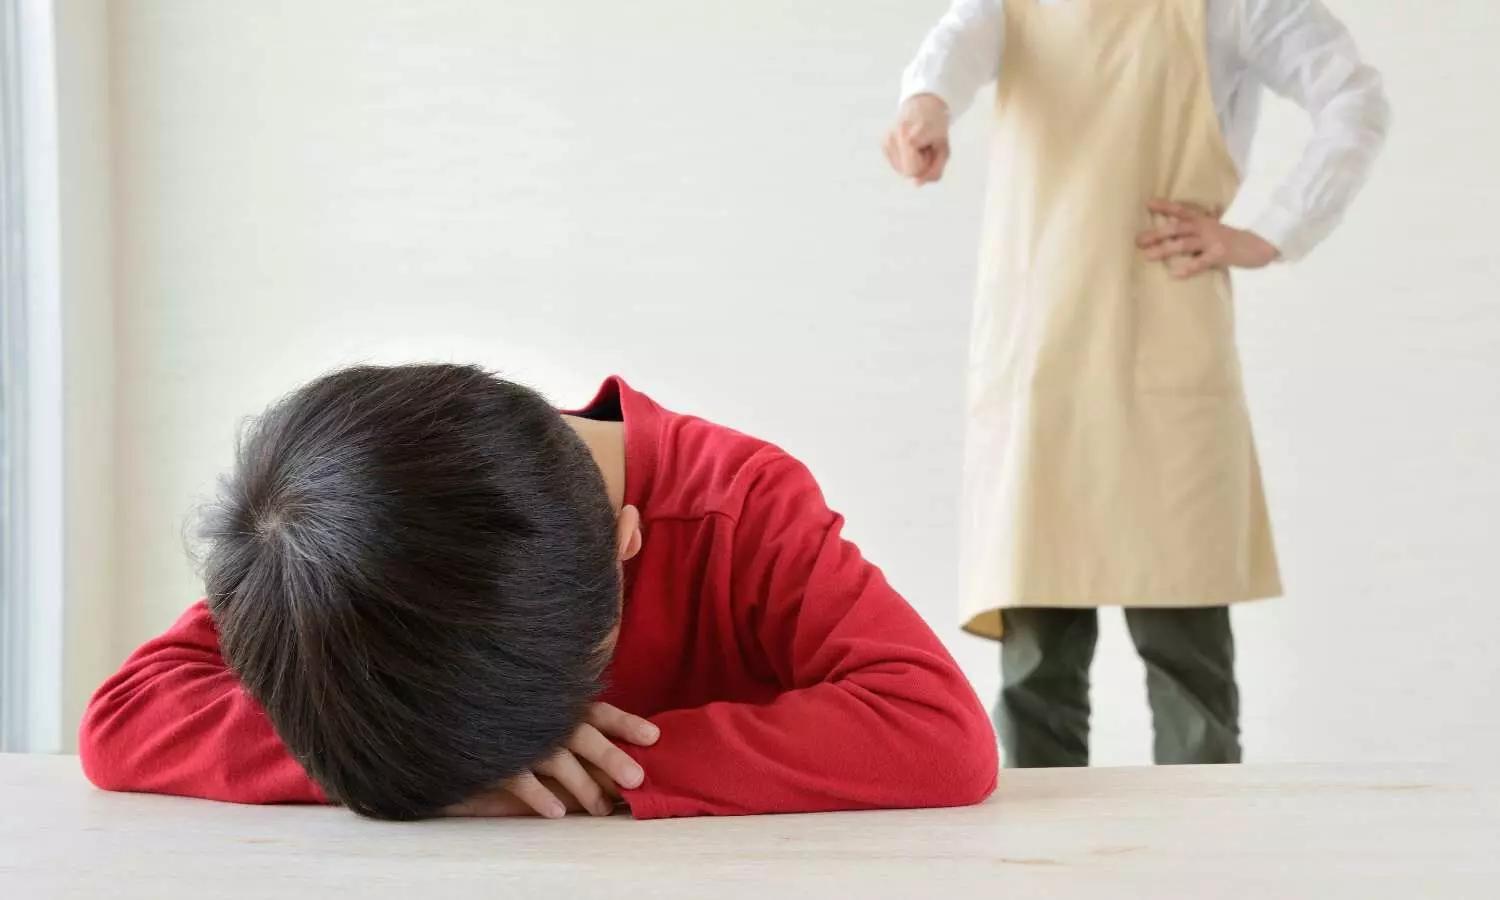 Corporal punishment might impact brain activity and neurodevelopment leading to anxiety and depression